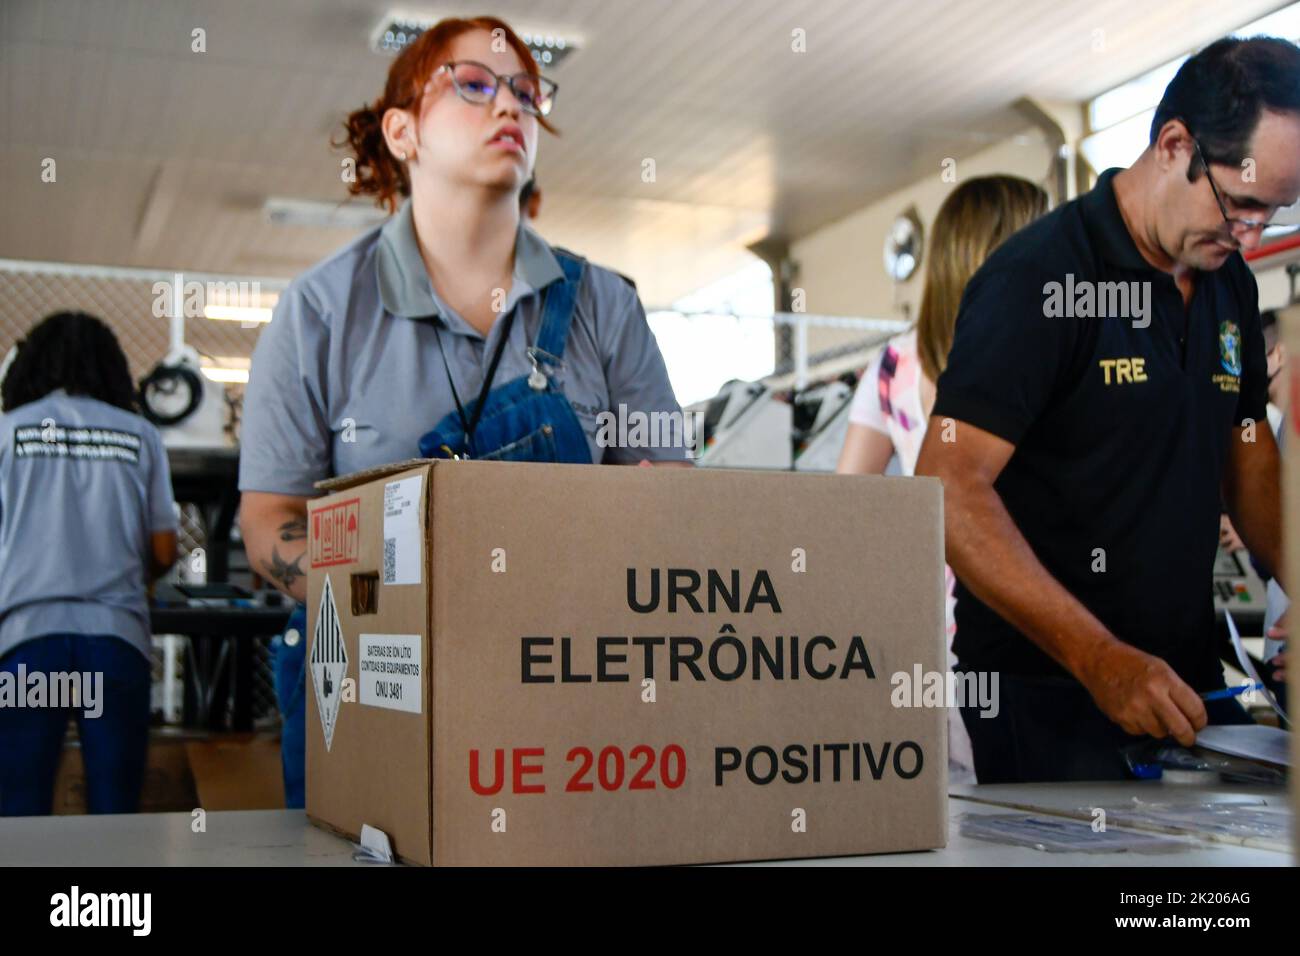 BRASÍLIA, DF - 21.09.2022: TRE REALIZA LACRAÇÃO DAS URNAS ELETRÔNICAS - Photo Employees of TRE DF checking and loading the box with an electronic ballot box. This Wednesday (21) the TRE of the Federal District began the process of sealing and putting in boxes the electronic ballot boxes to distribute in the region's elections. (Photo: Ton Molina/Fotoarena) Stock Photo